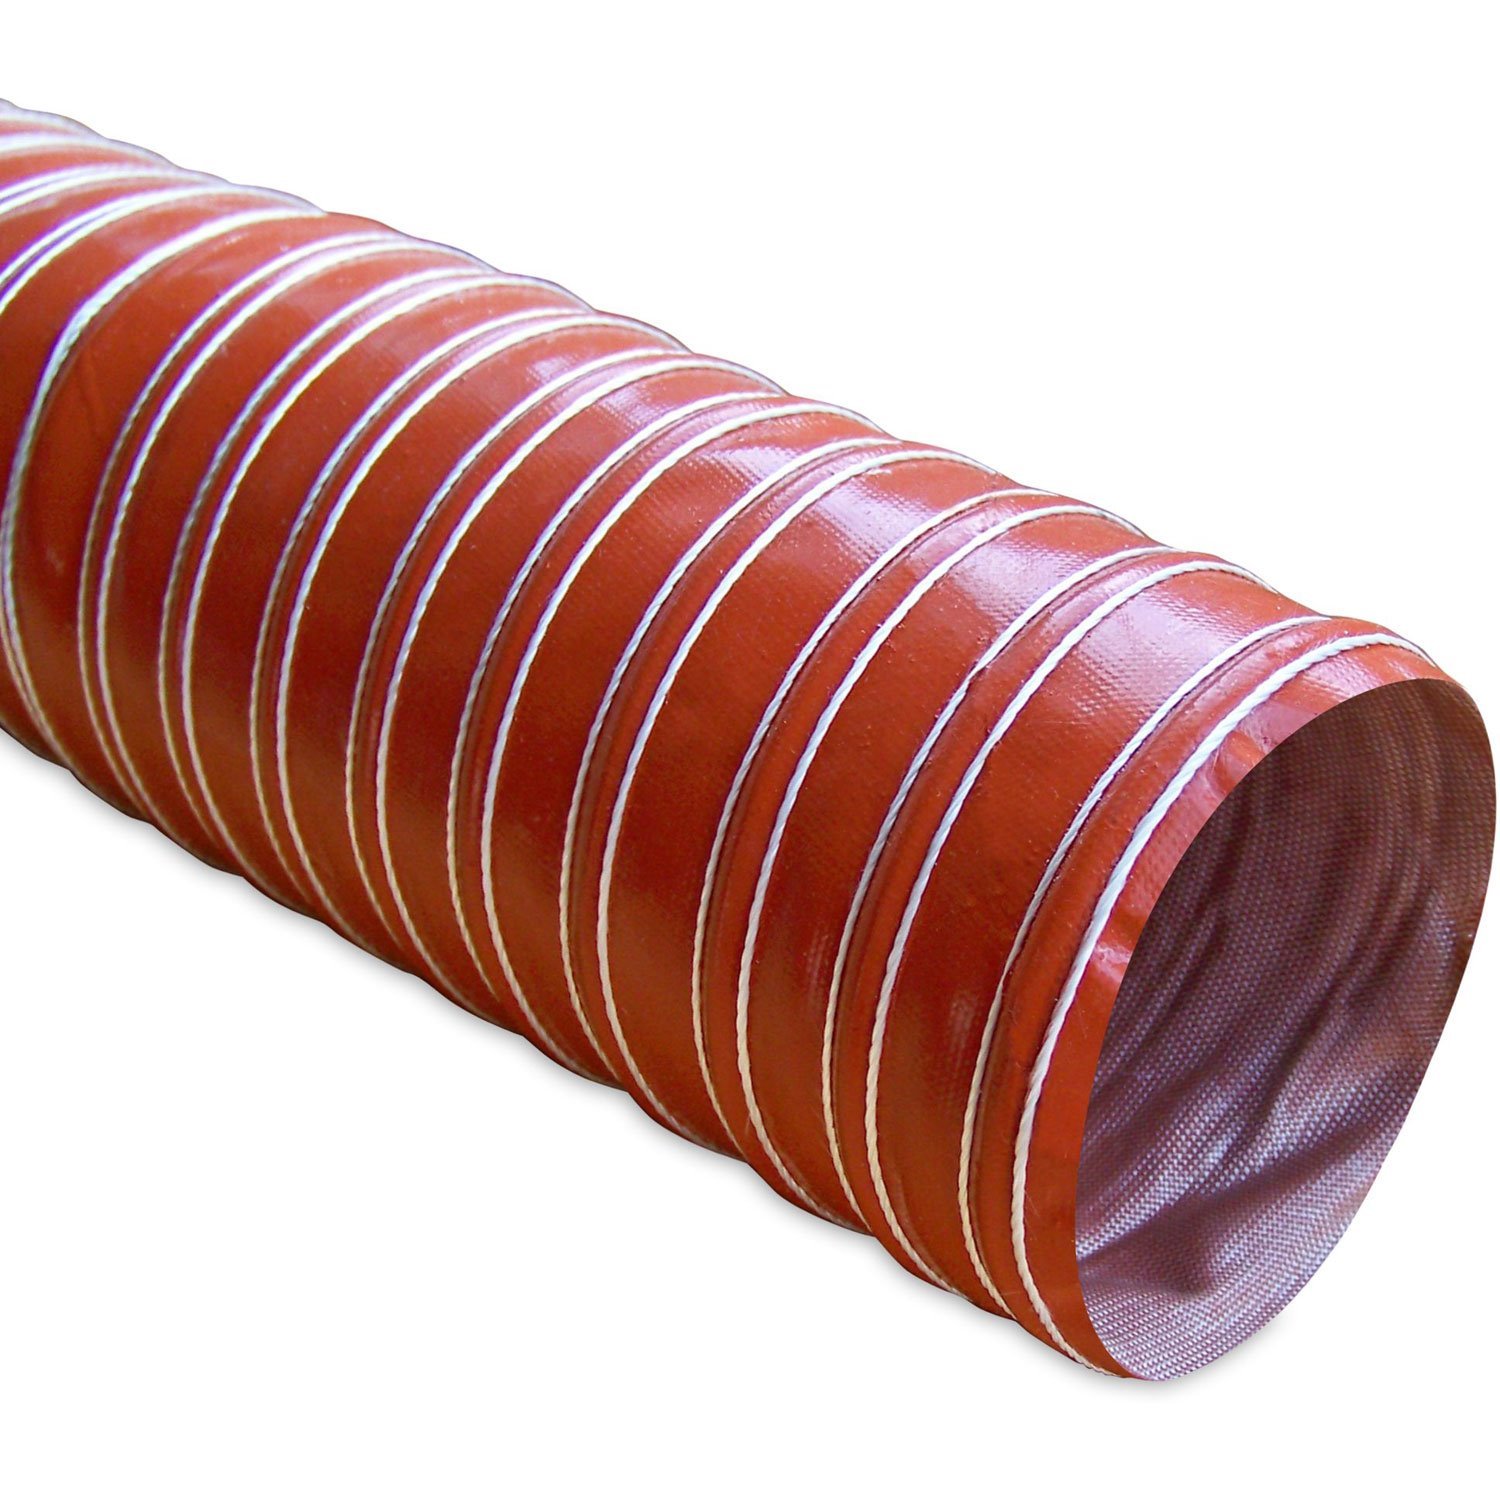 Heat Resistant Silicone Ducting